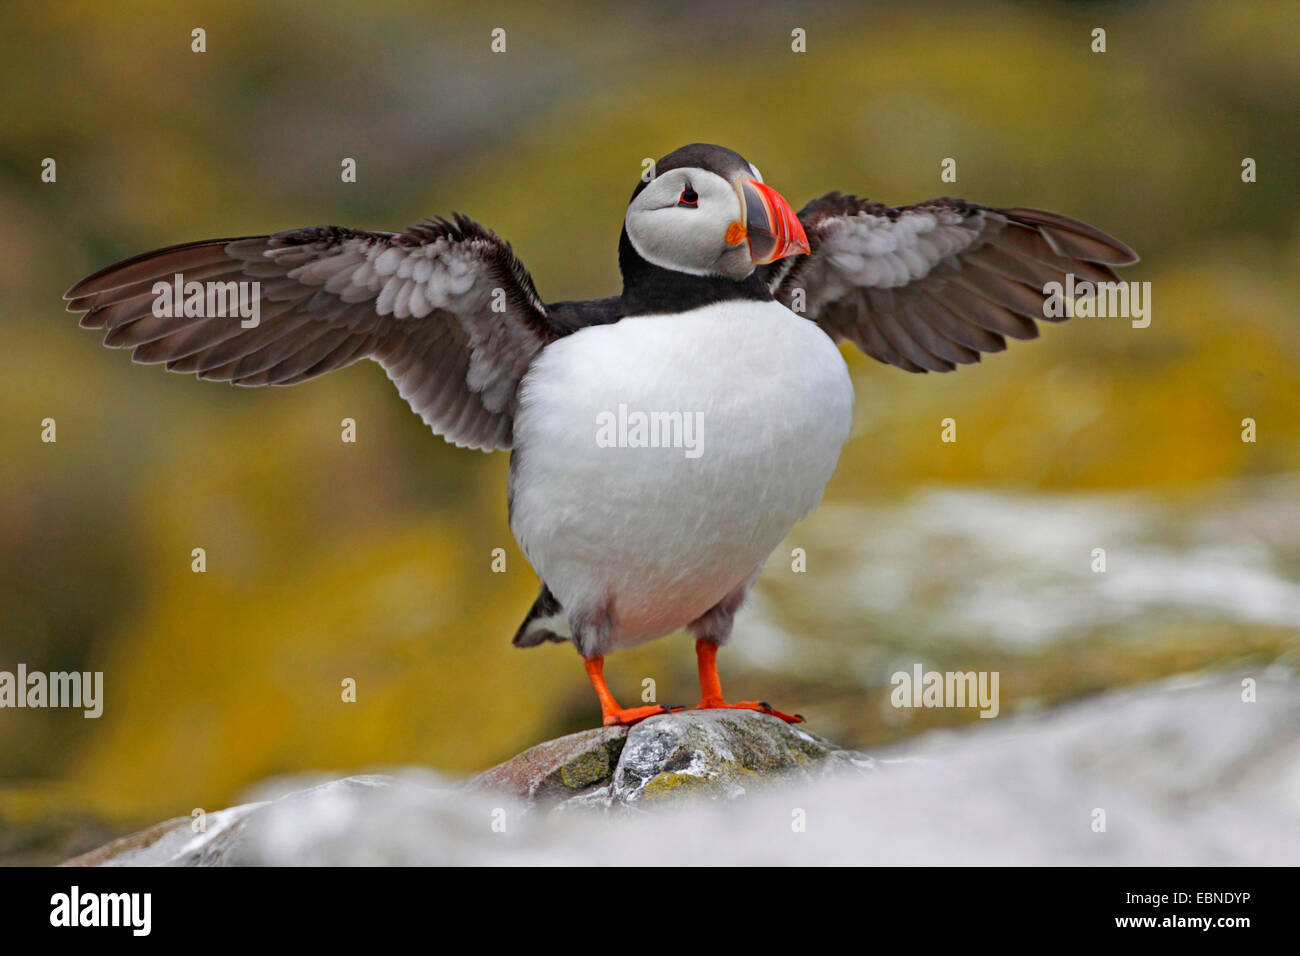 Atlantic puffin, Common puffin (Fratercula arctica), sitting with outstretched wings on a stone, United Kingdom, England, Farne Islands, Staple Island Stock Photo